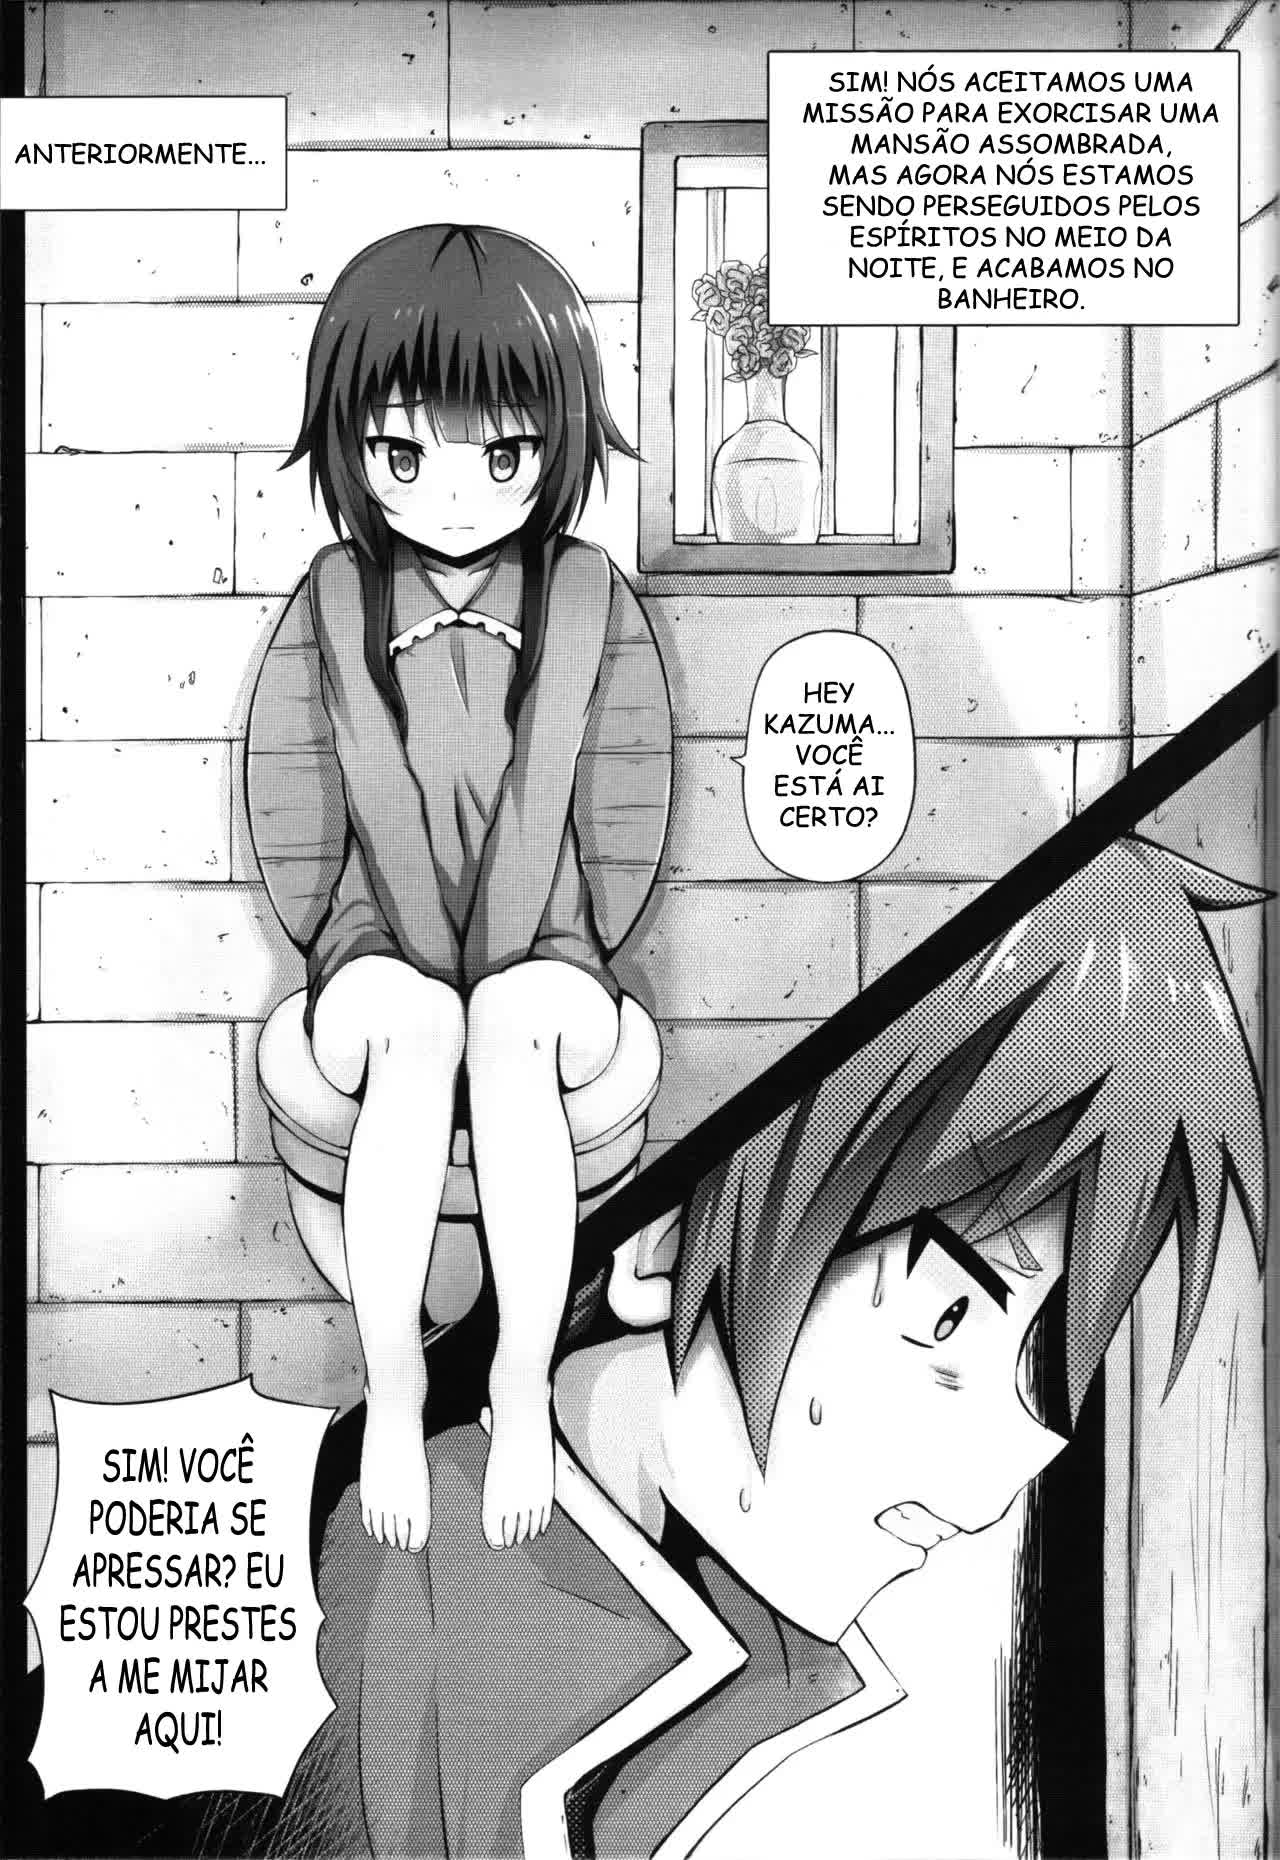 Giving to Megumin in the Toilet! Hentai